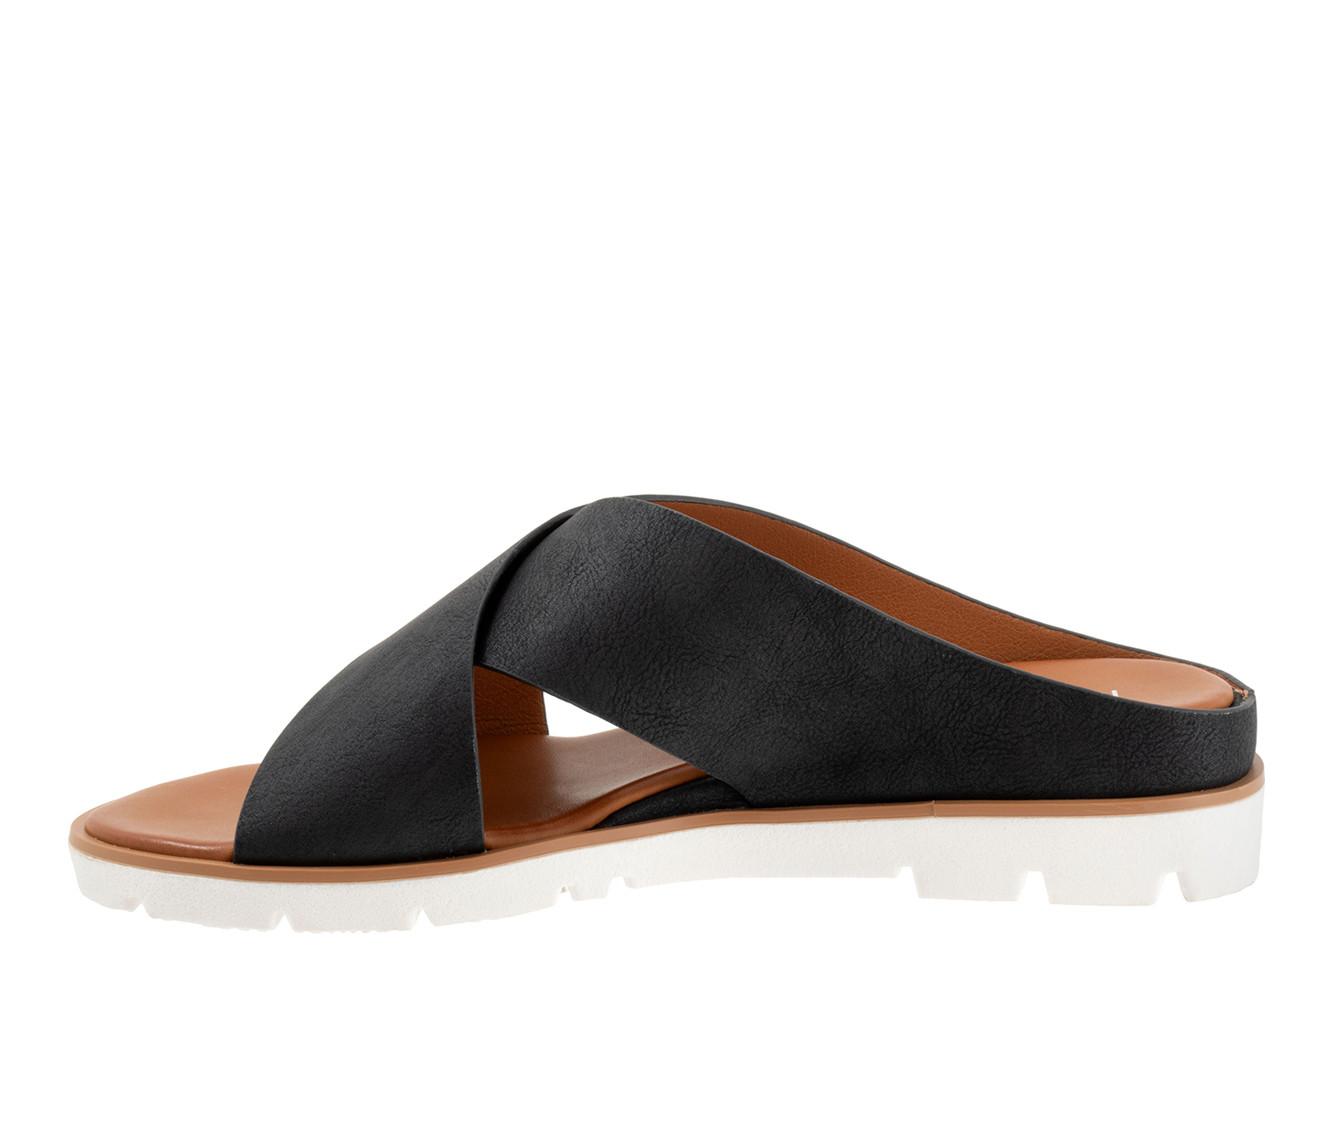 Women's Los Cabos Abby Sandals